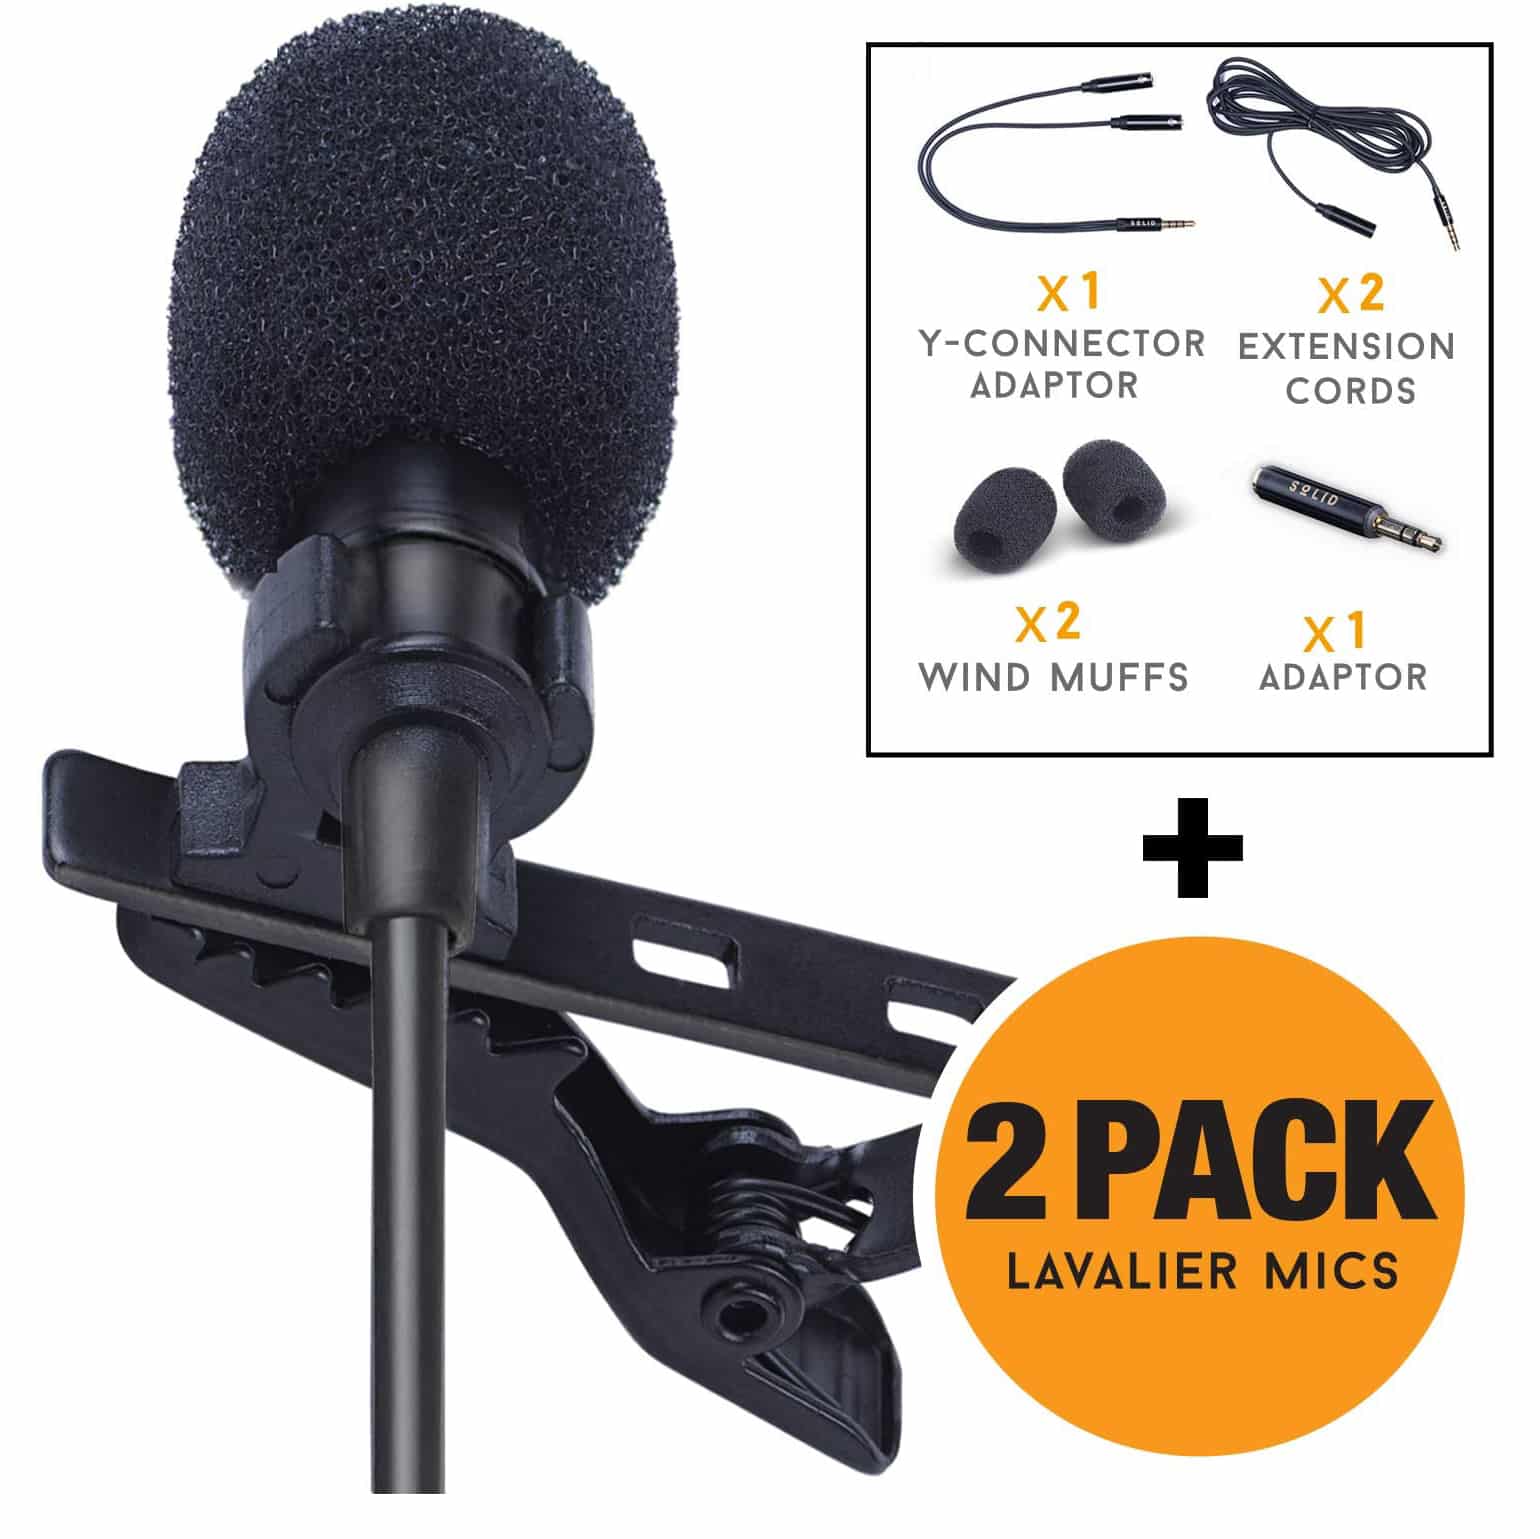 SoLID (TM) Lavalier Microphone